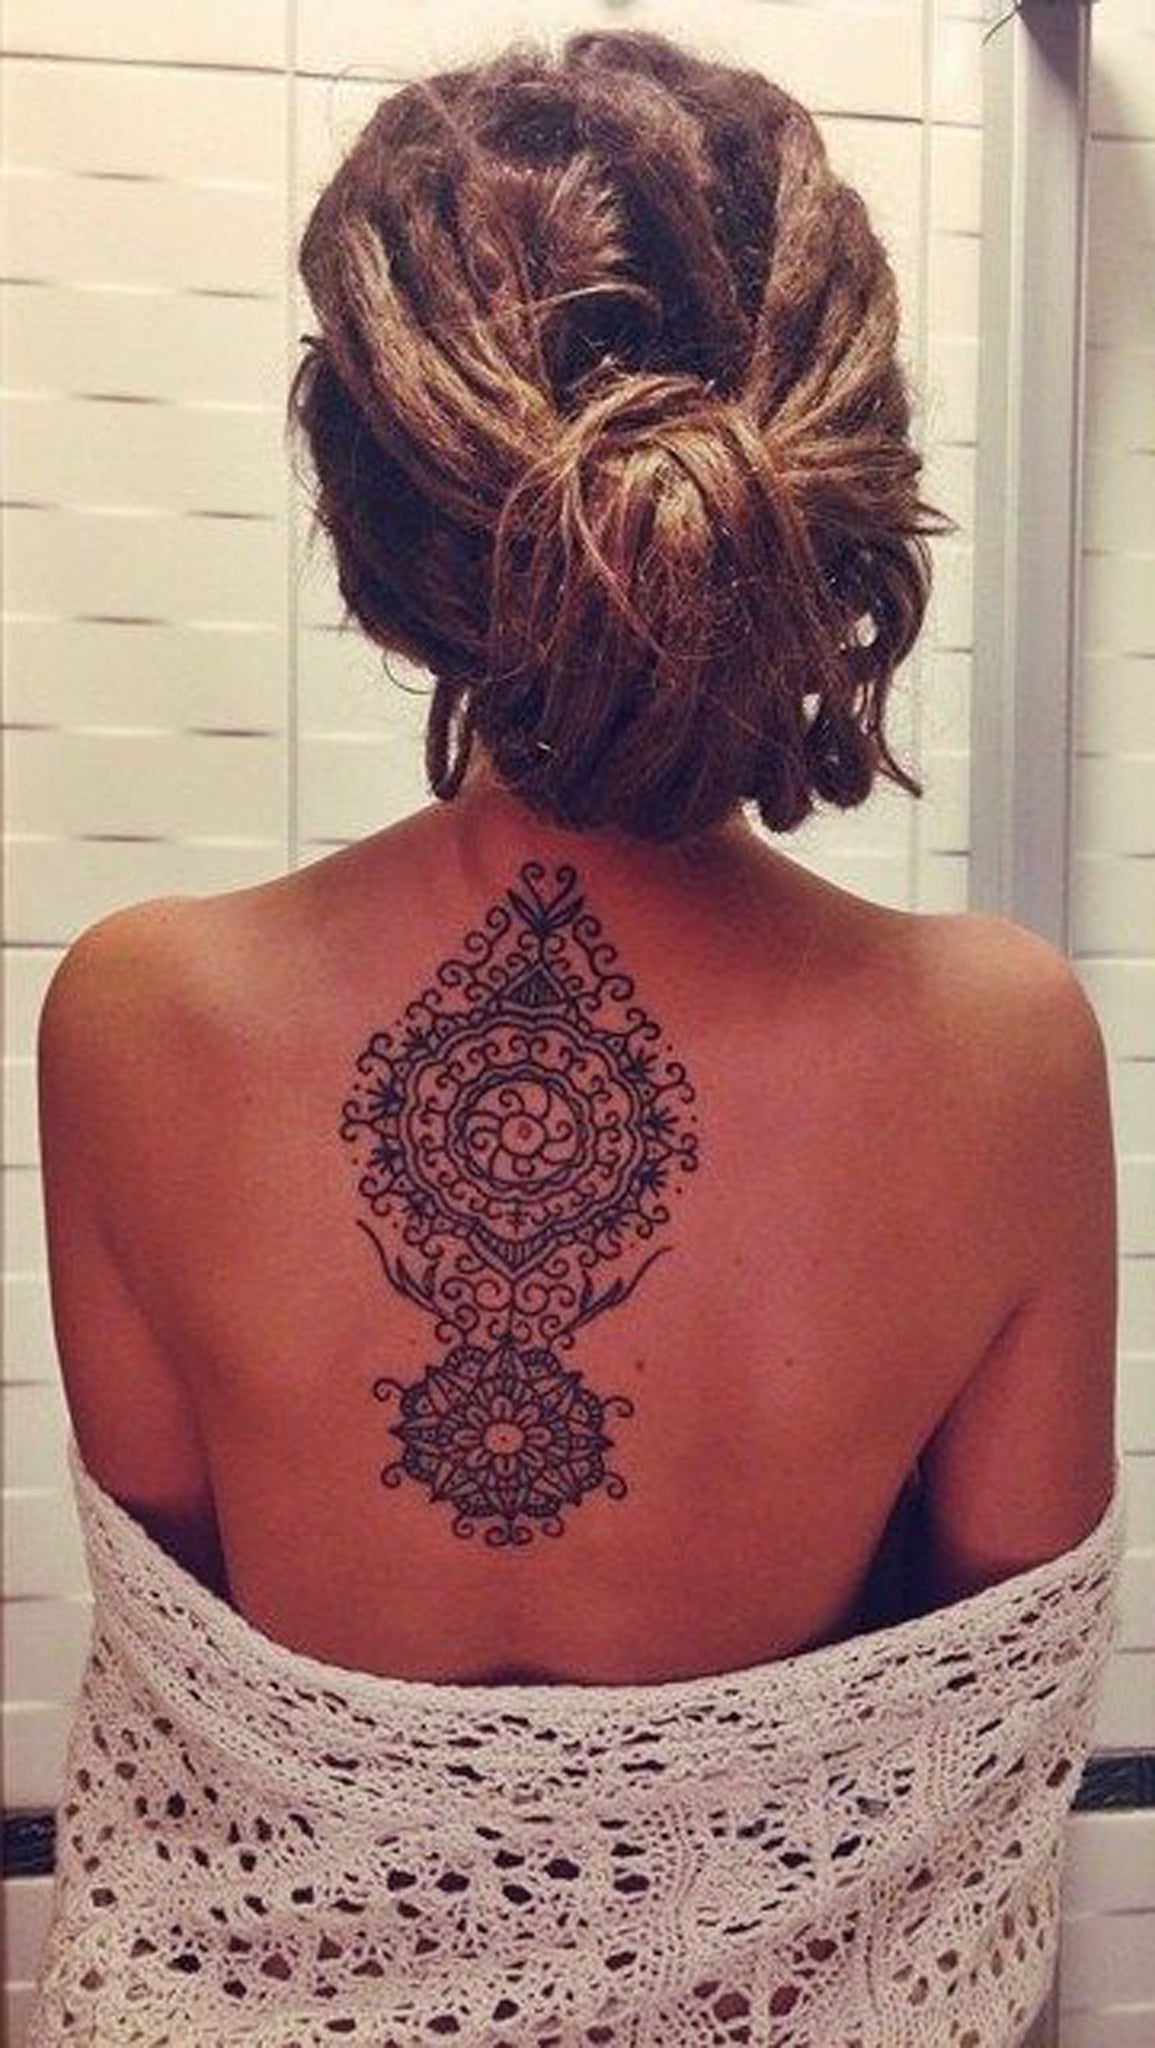 50 Stunning Spine Tattoo Ideas That Will Make You Want To Get Inked   DeMilked